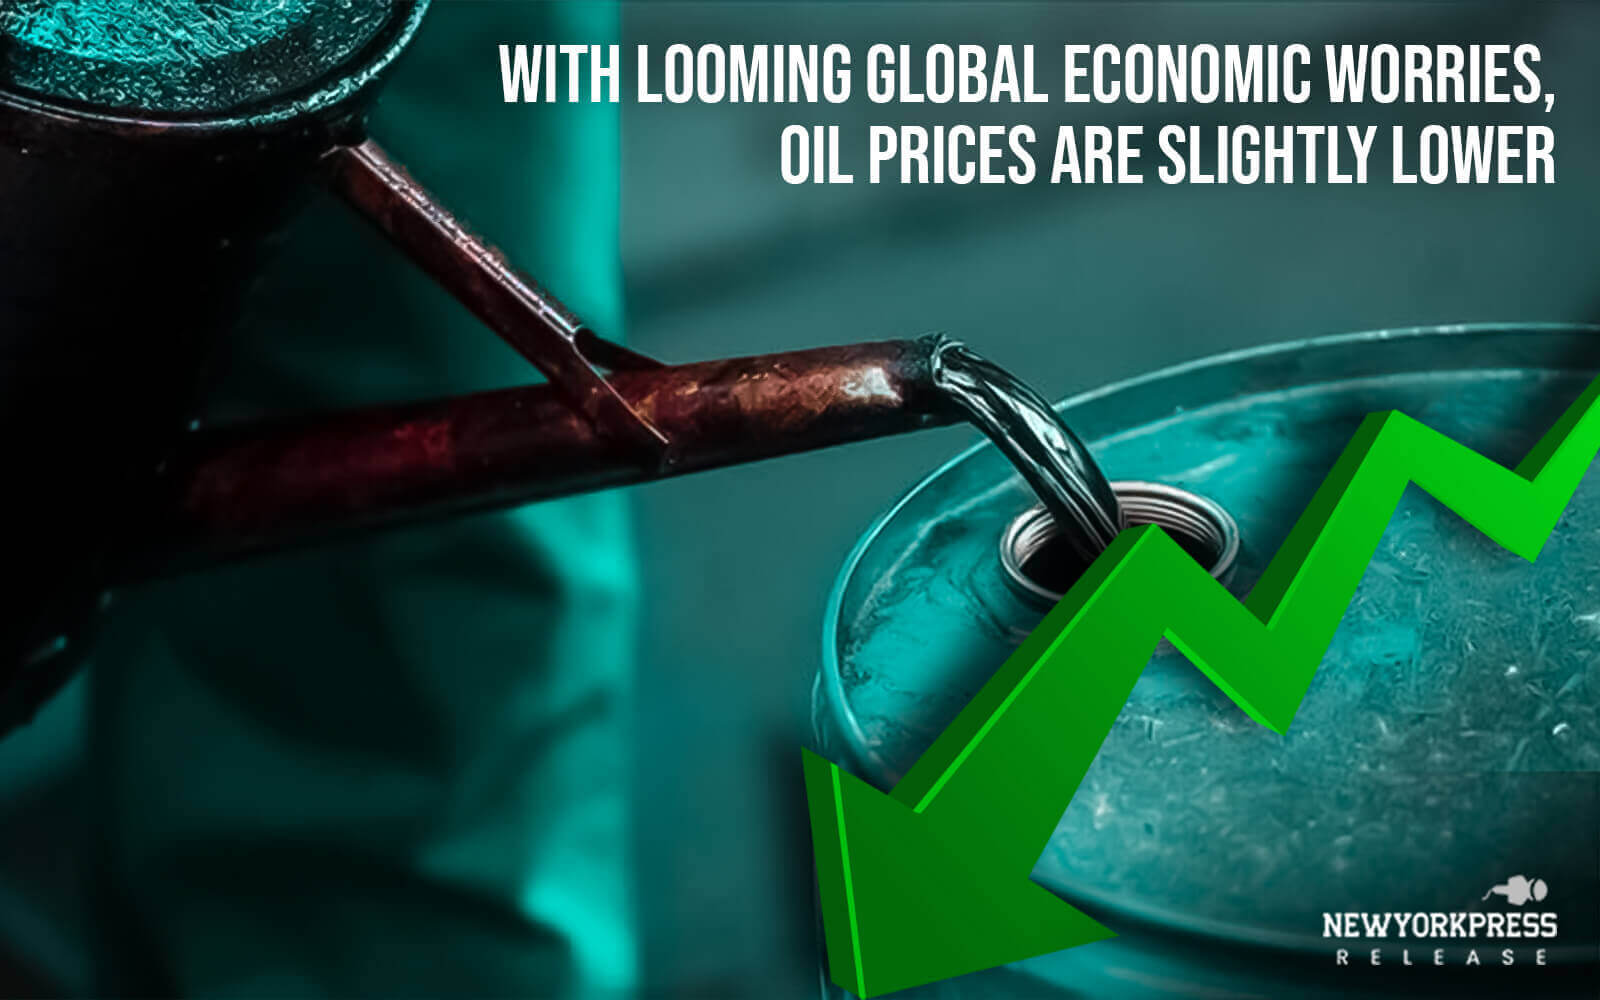 With looming global economic worries, oil prices are slightly lower. - New York Press Release